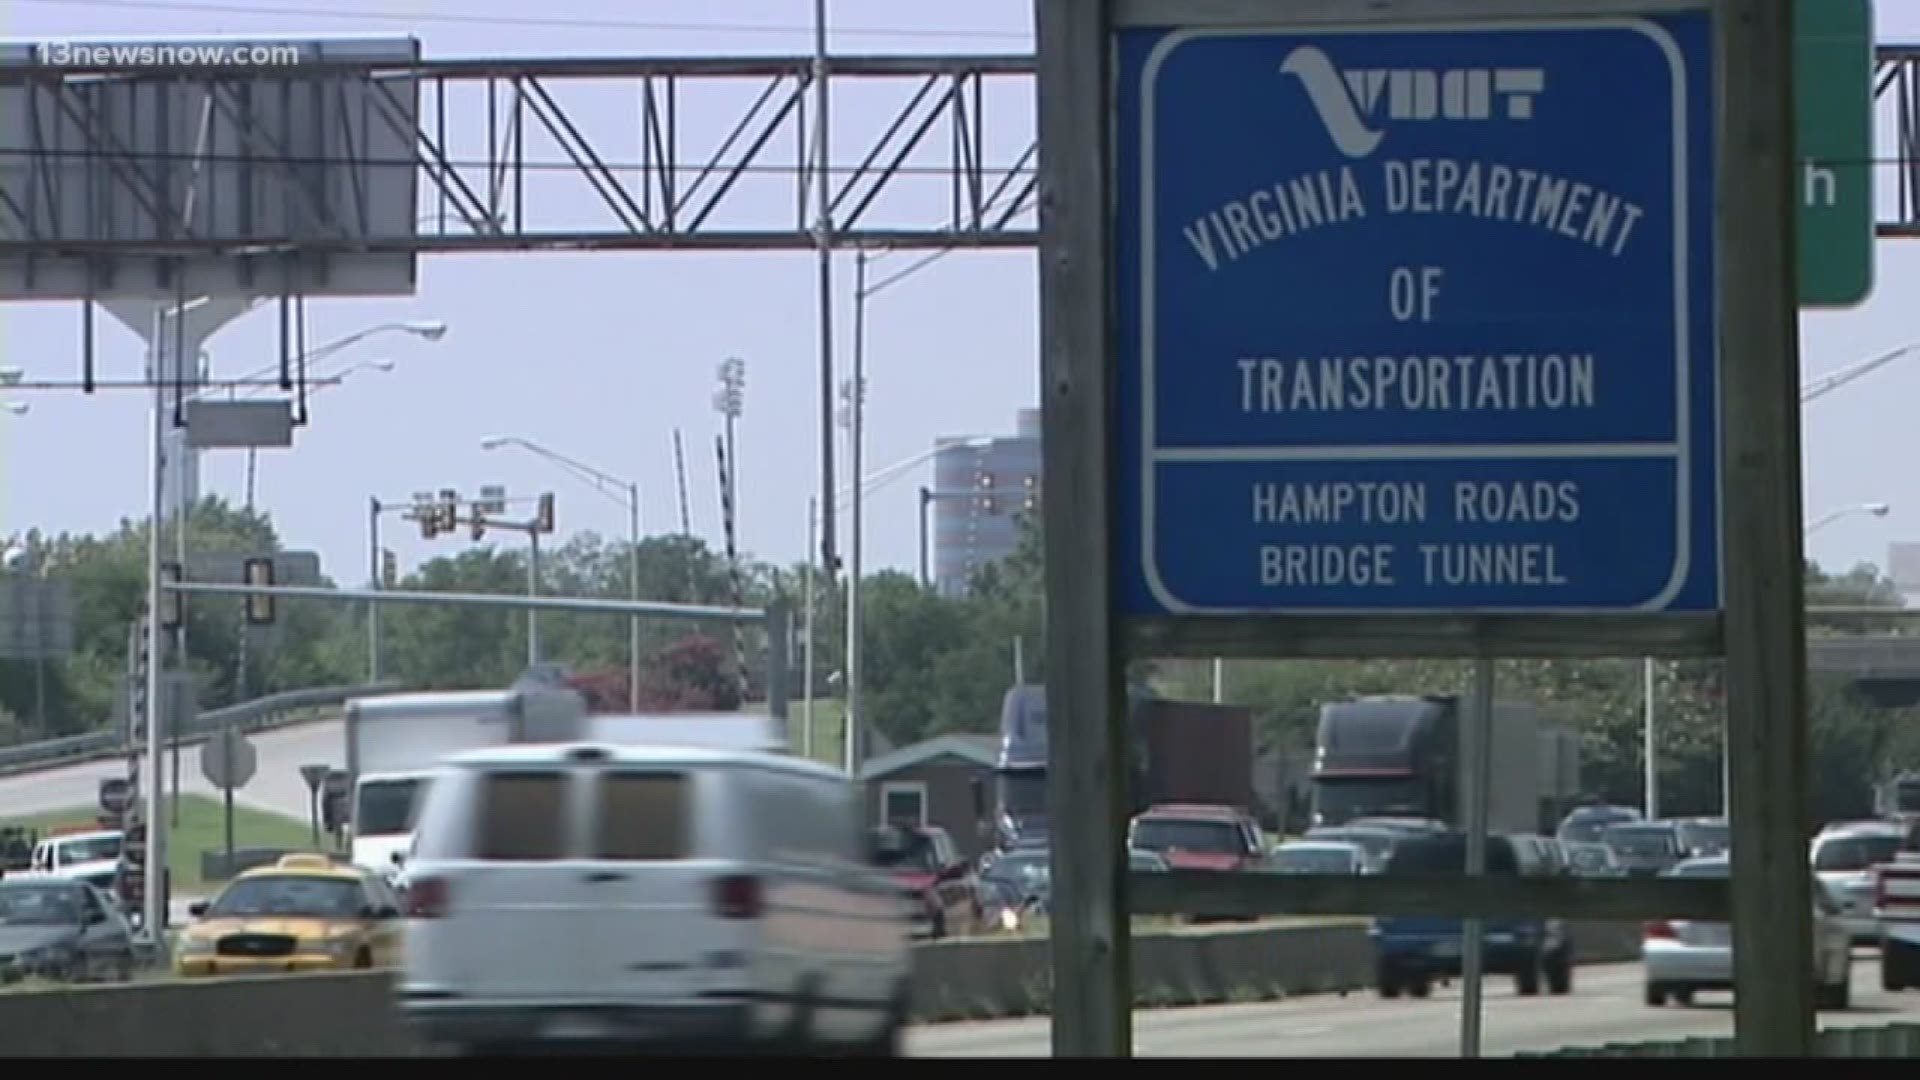 VDOT is moving forward with the HRBT expansion project.